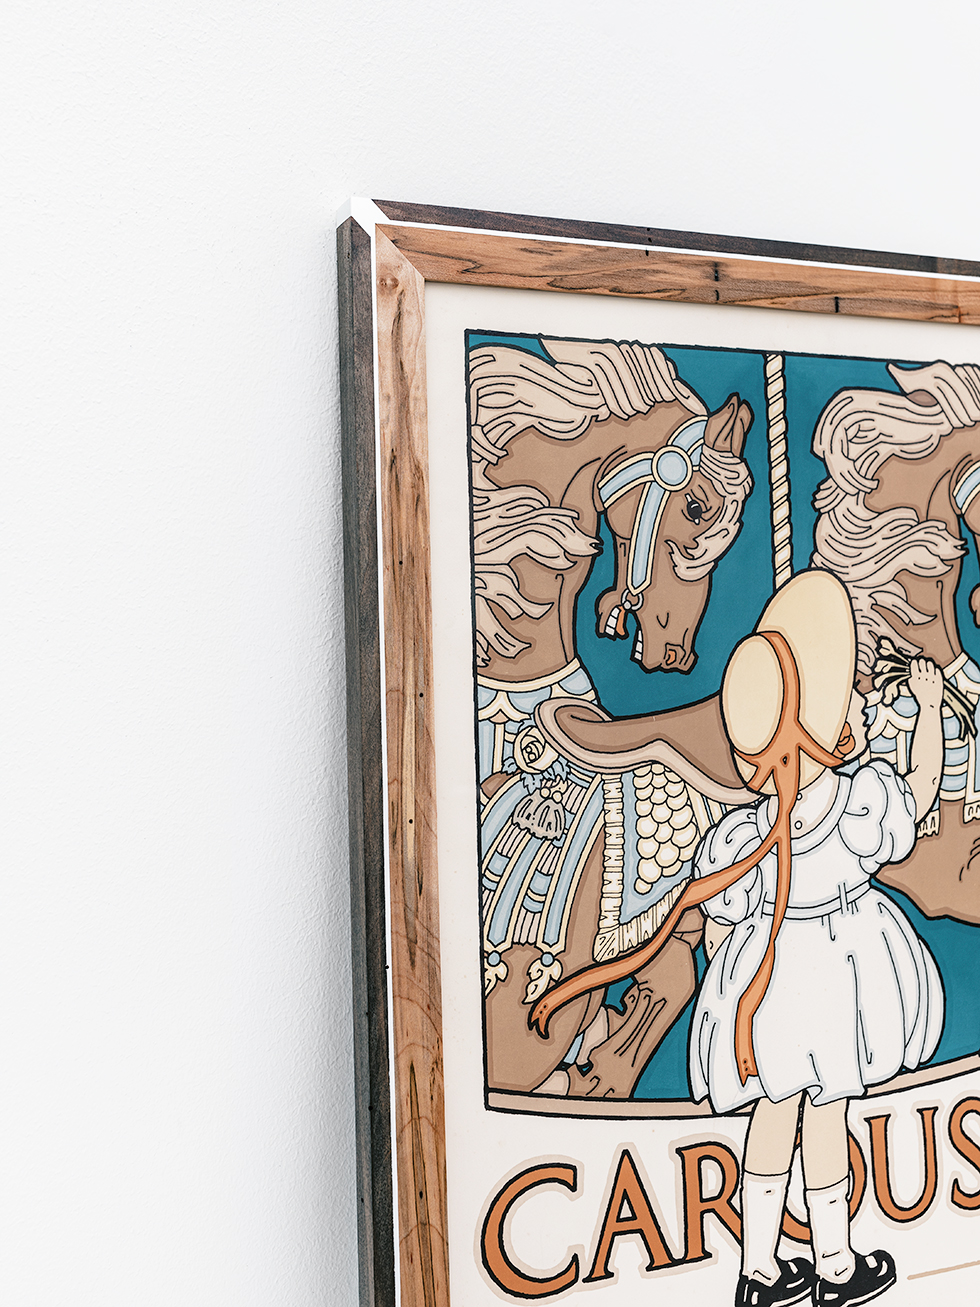 Detail view of the custom painted details on the figured maple wood frame for the vintage David Lance Goines Carousel poster.